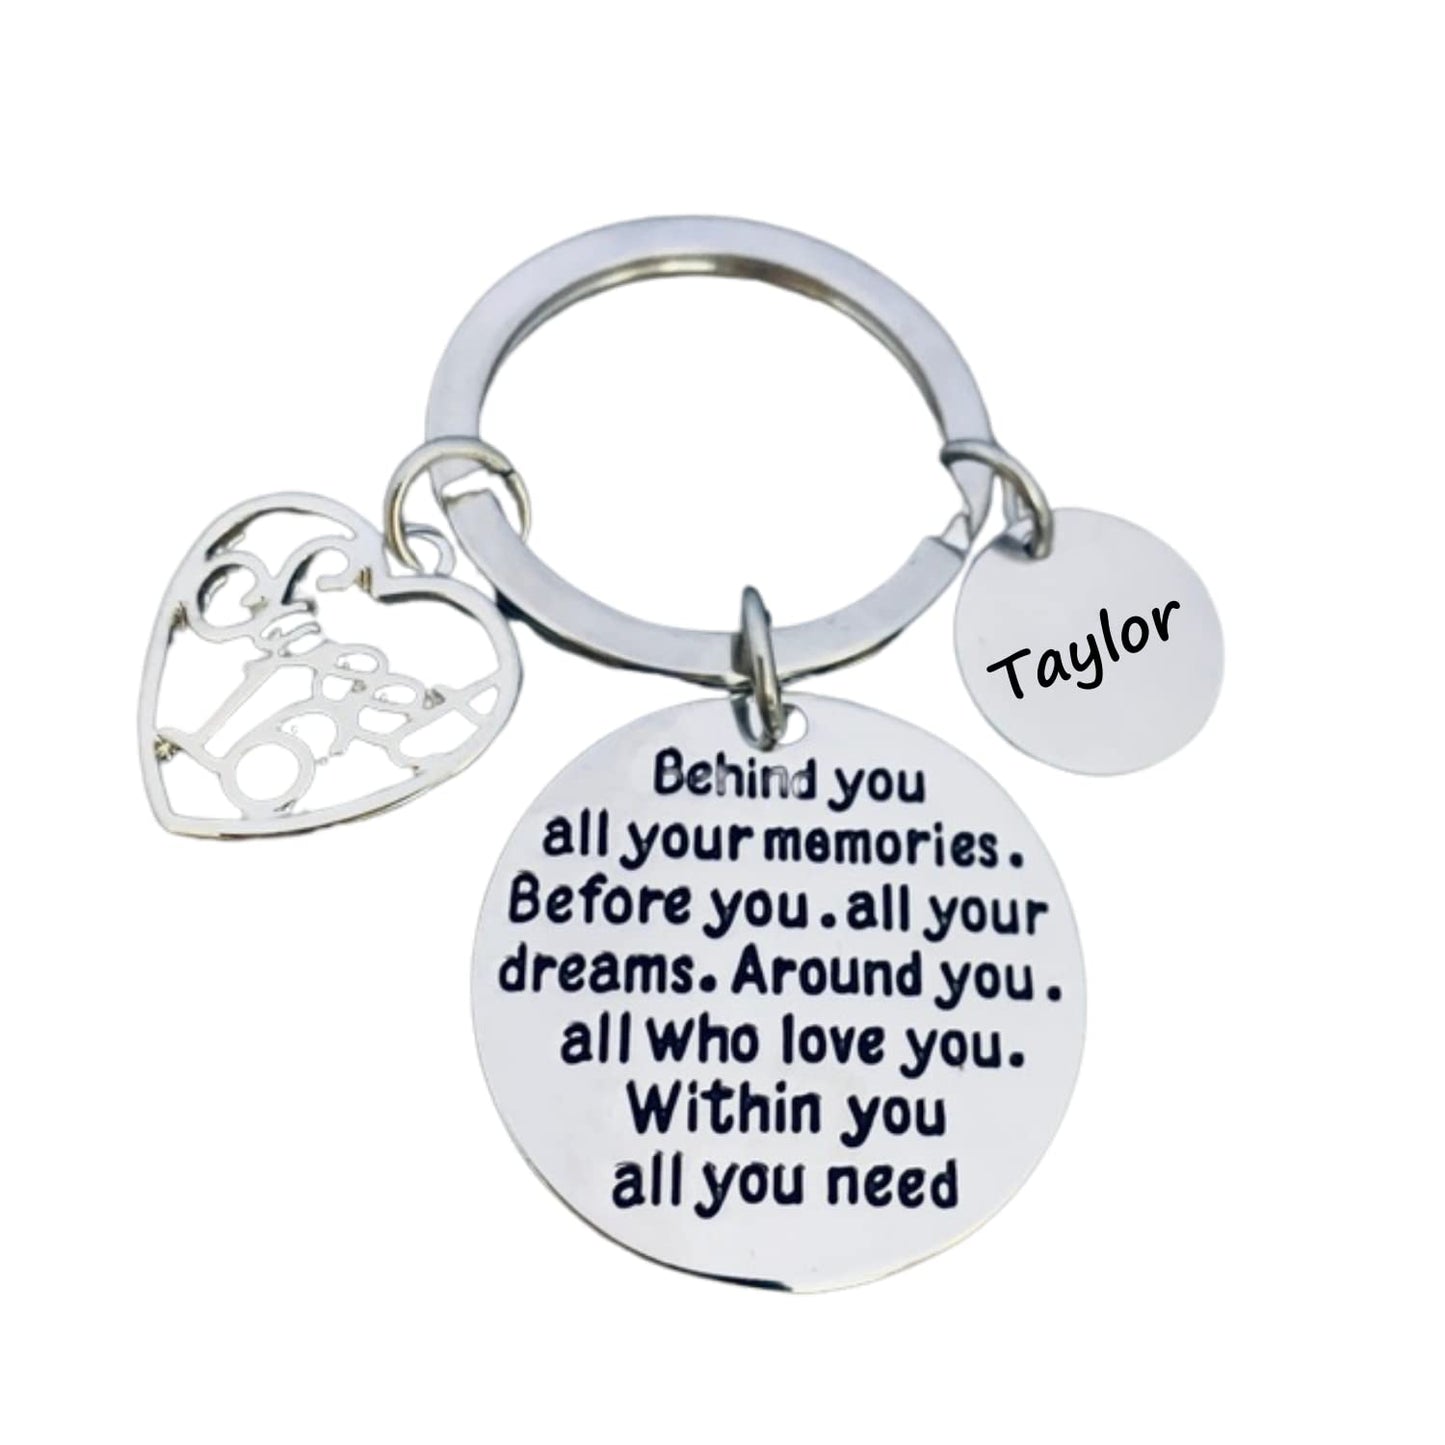 Personalized Round Engraved Sweet 16 Charm Keychain Gift for Birthday Girl